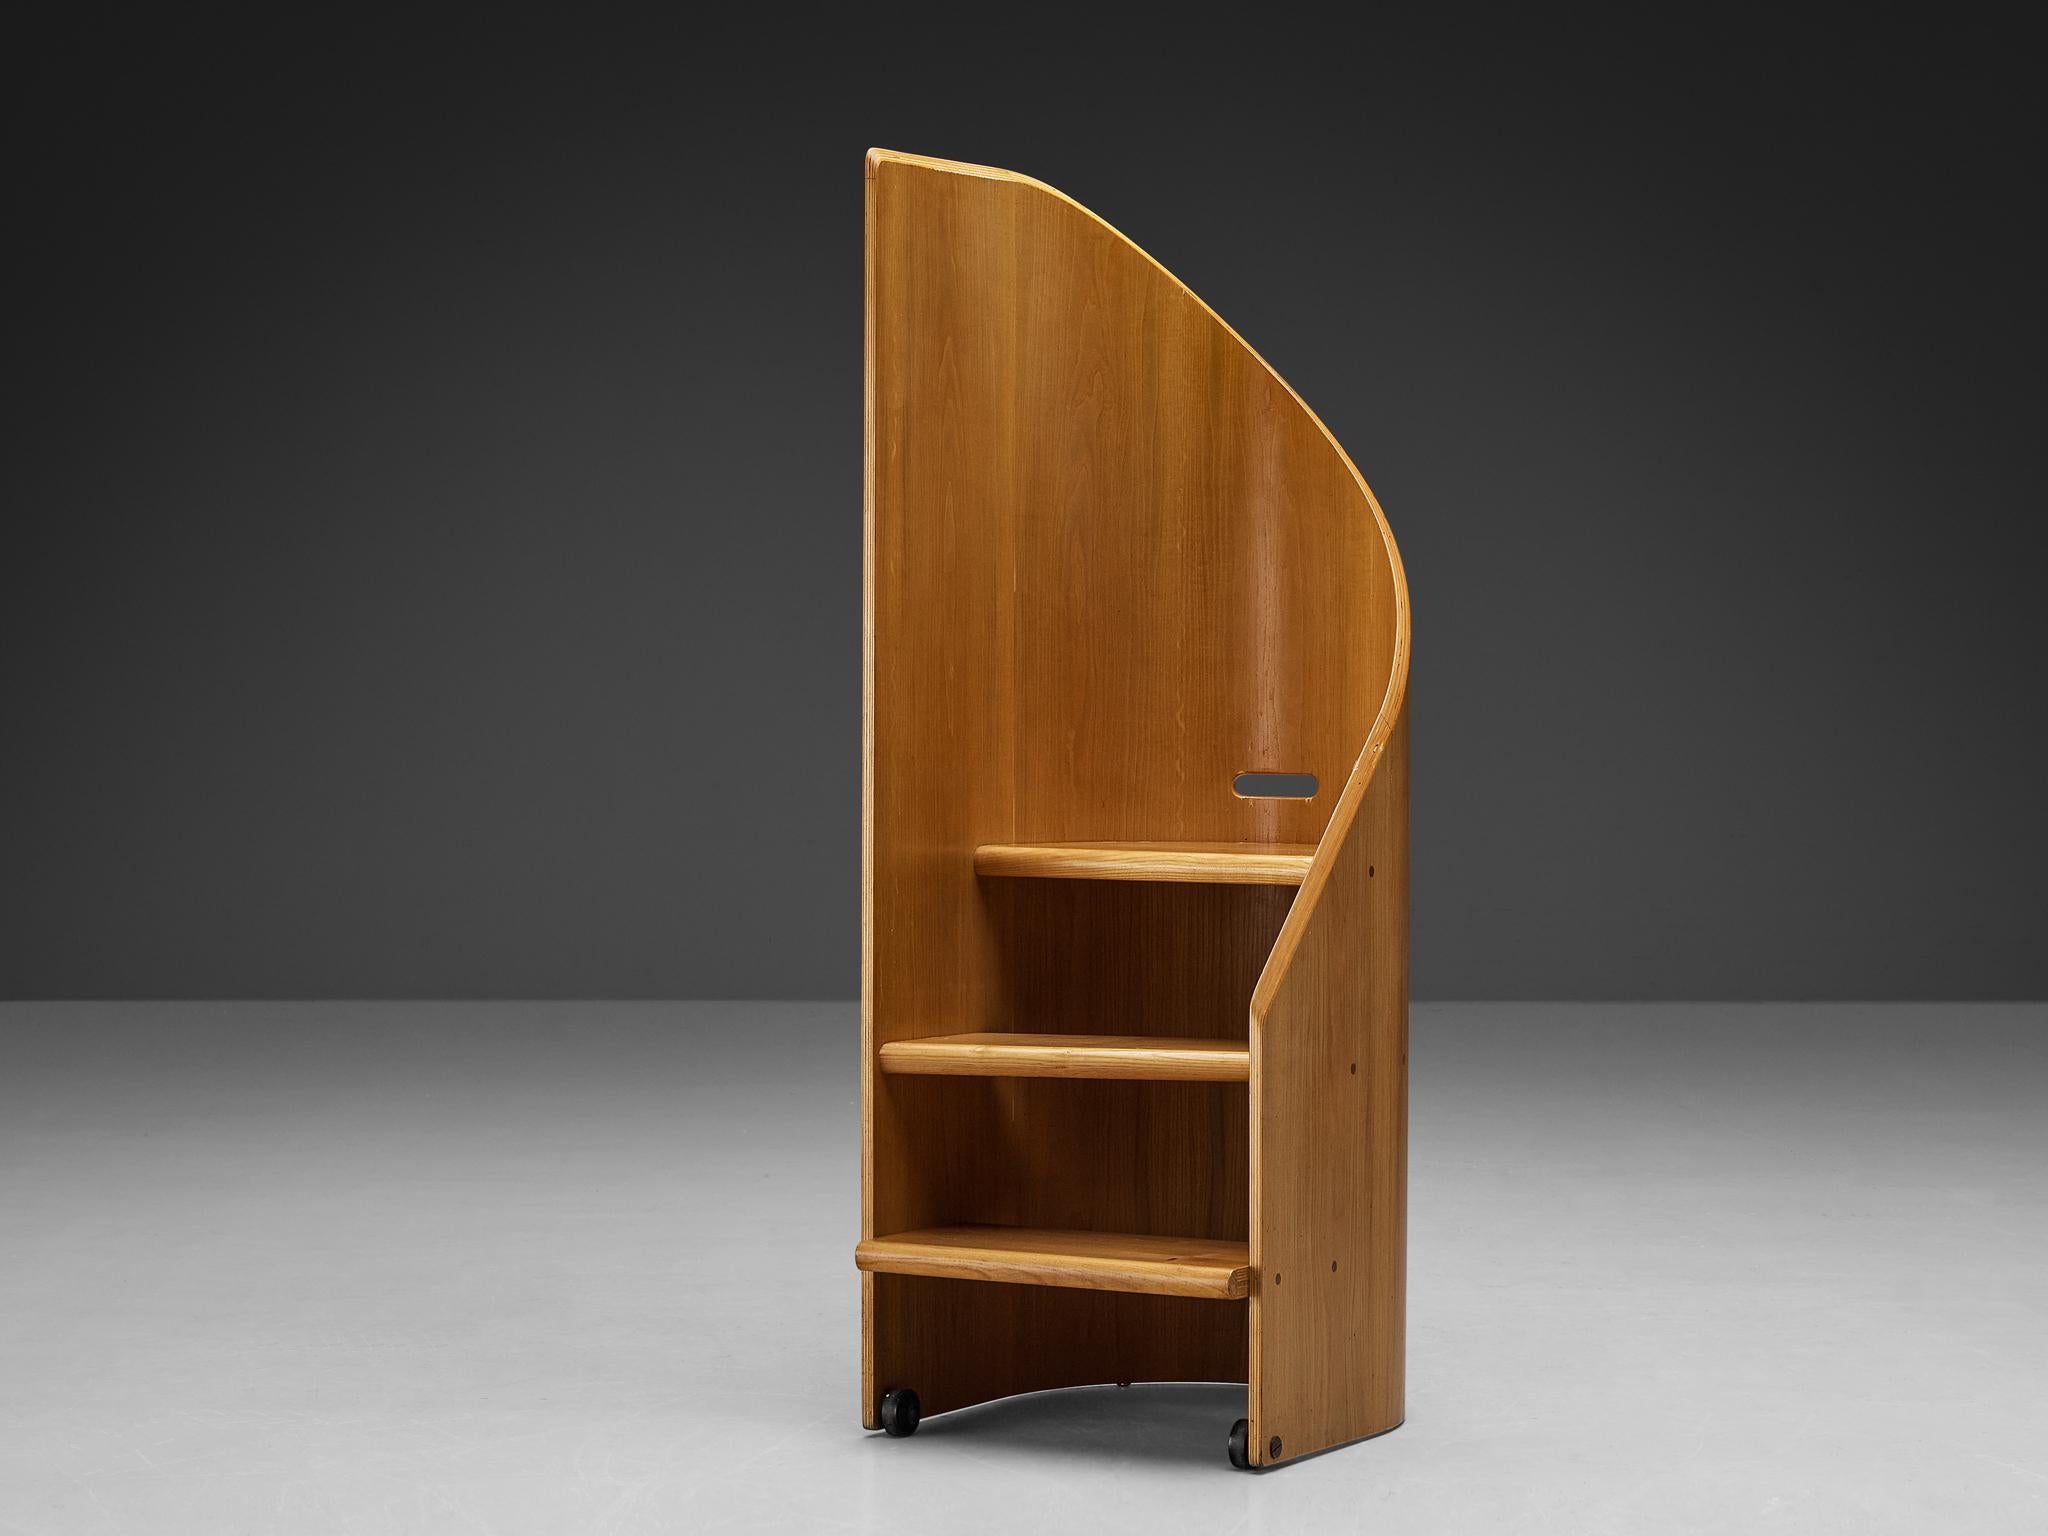 Giovanni Offredi for MC Selvini, 'Elitra' staircase, ash, plywood, brass, Italy, 1980s

A pragmatic and visually appealing staircase created by Italian designer Giovanni Offredi for MC Selvini in the eighties. The design stands out for its curvature